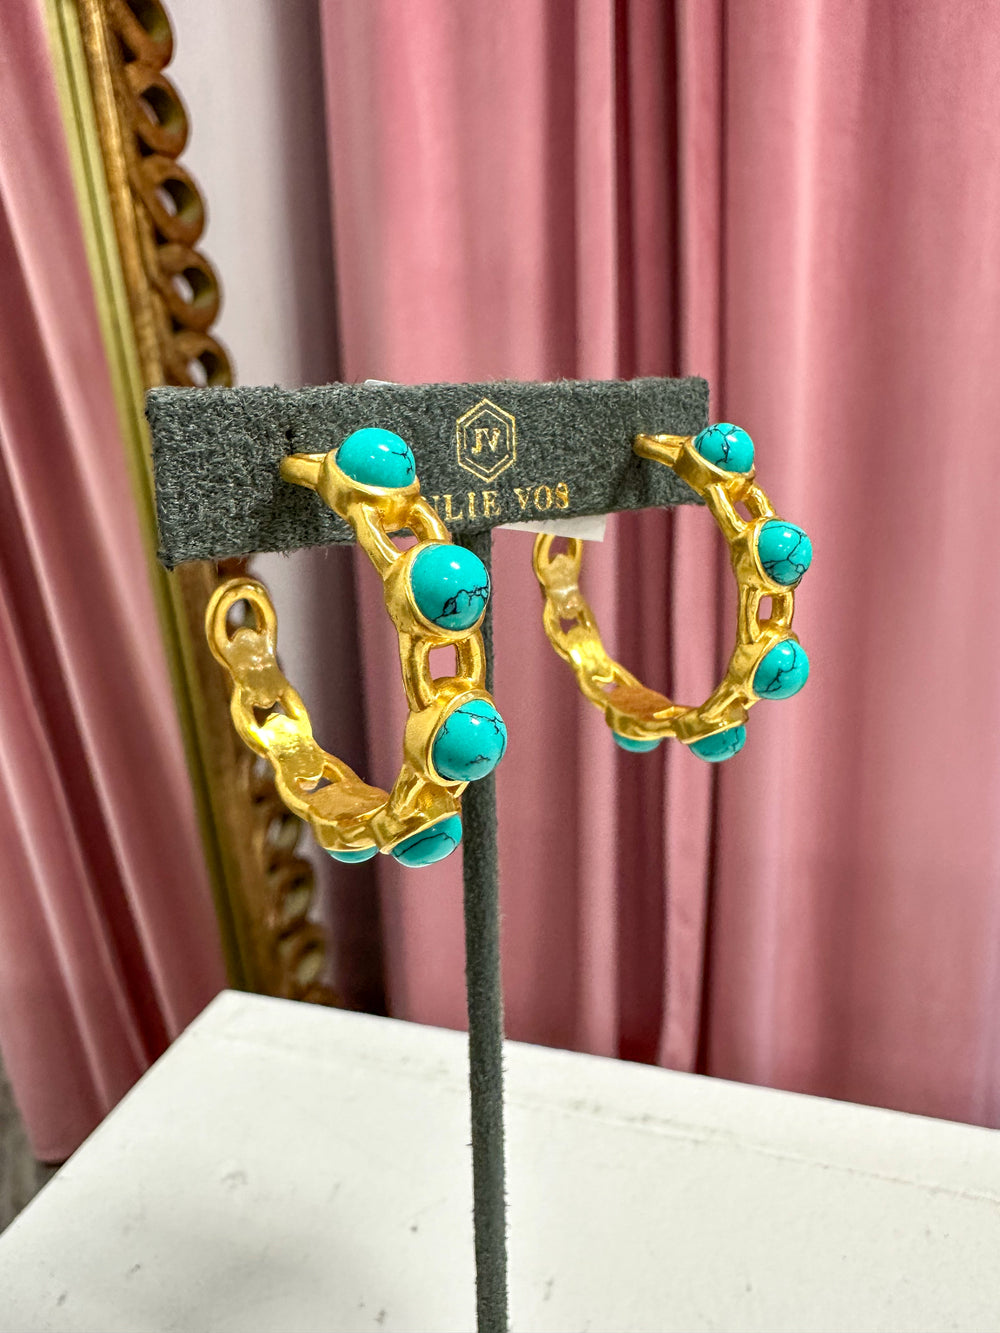 JULIE VOS | Palermo Turquoise Hoop - Turquoise Blue